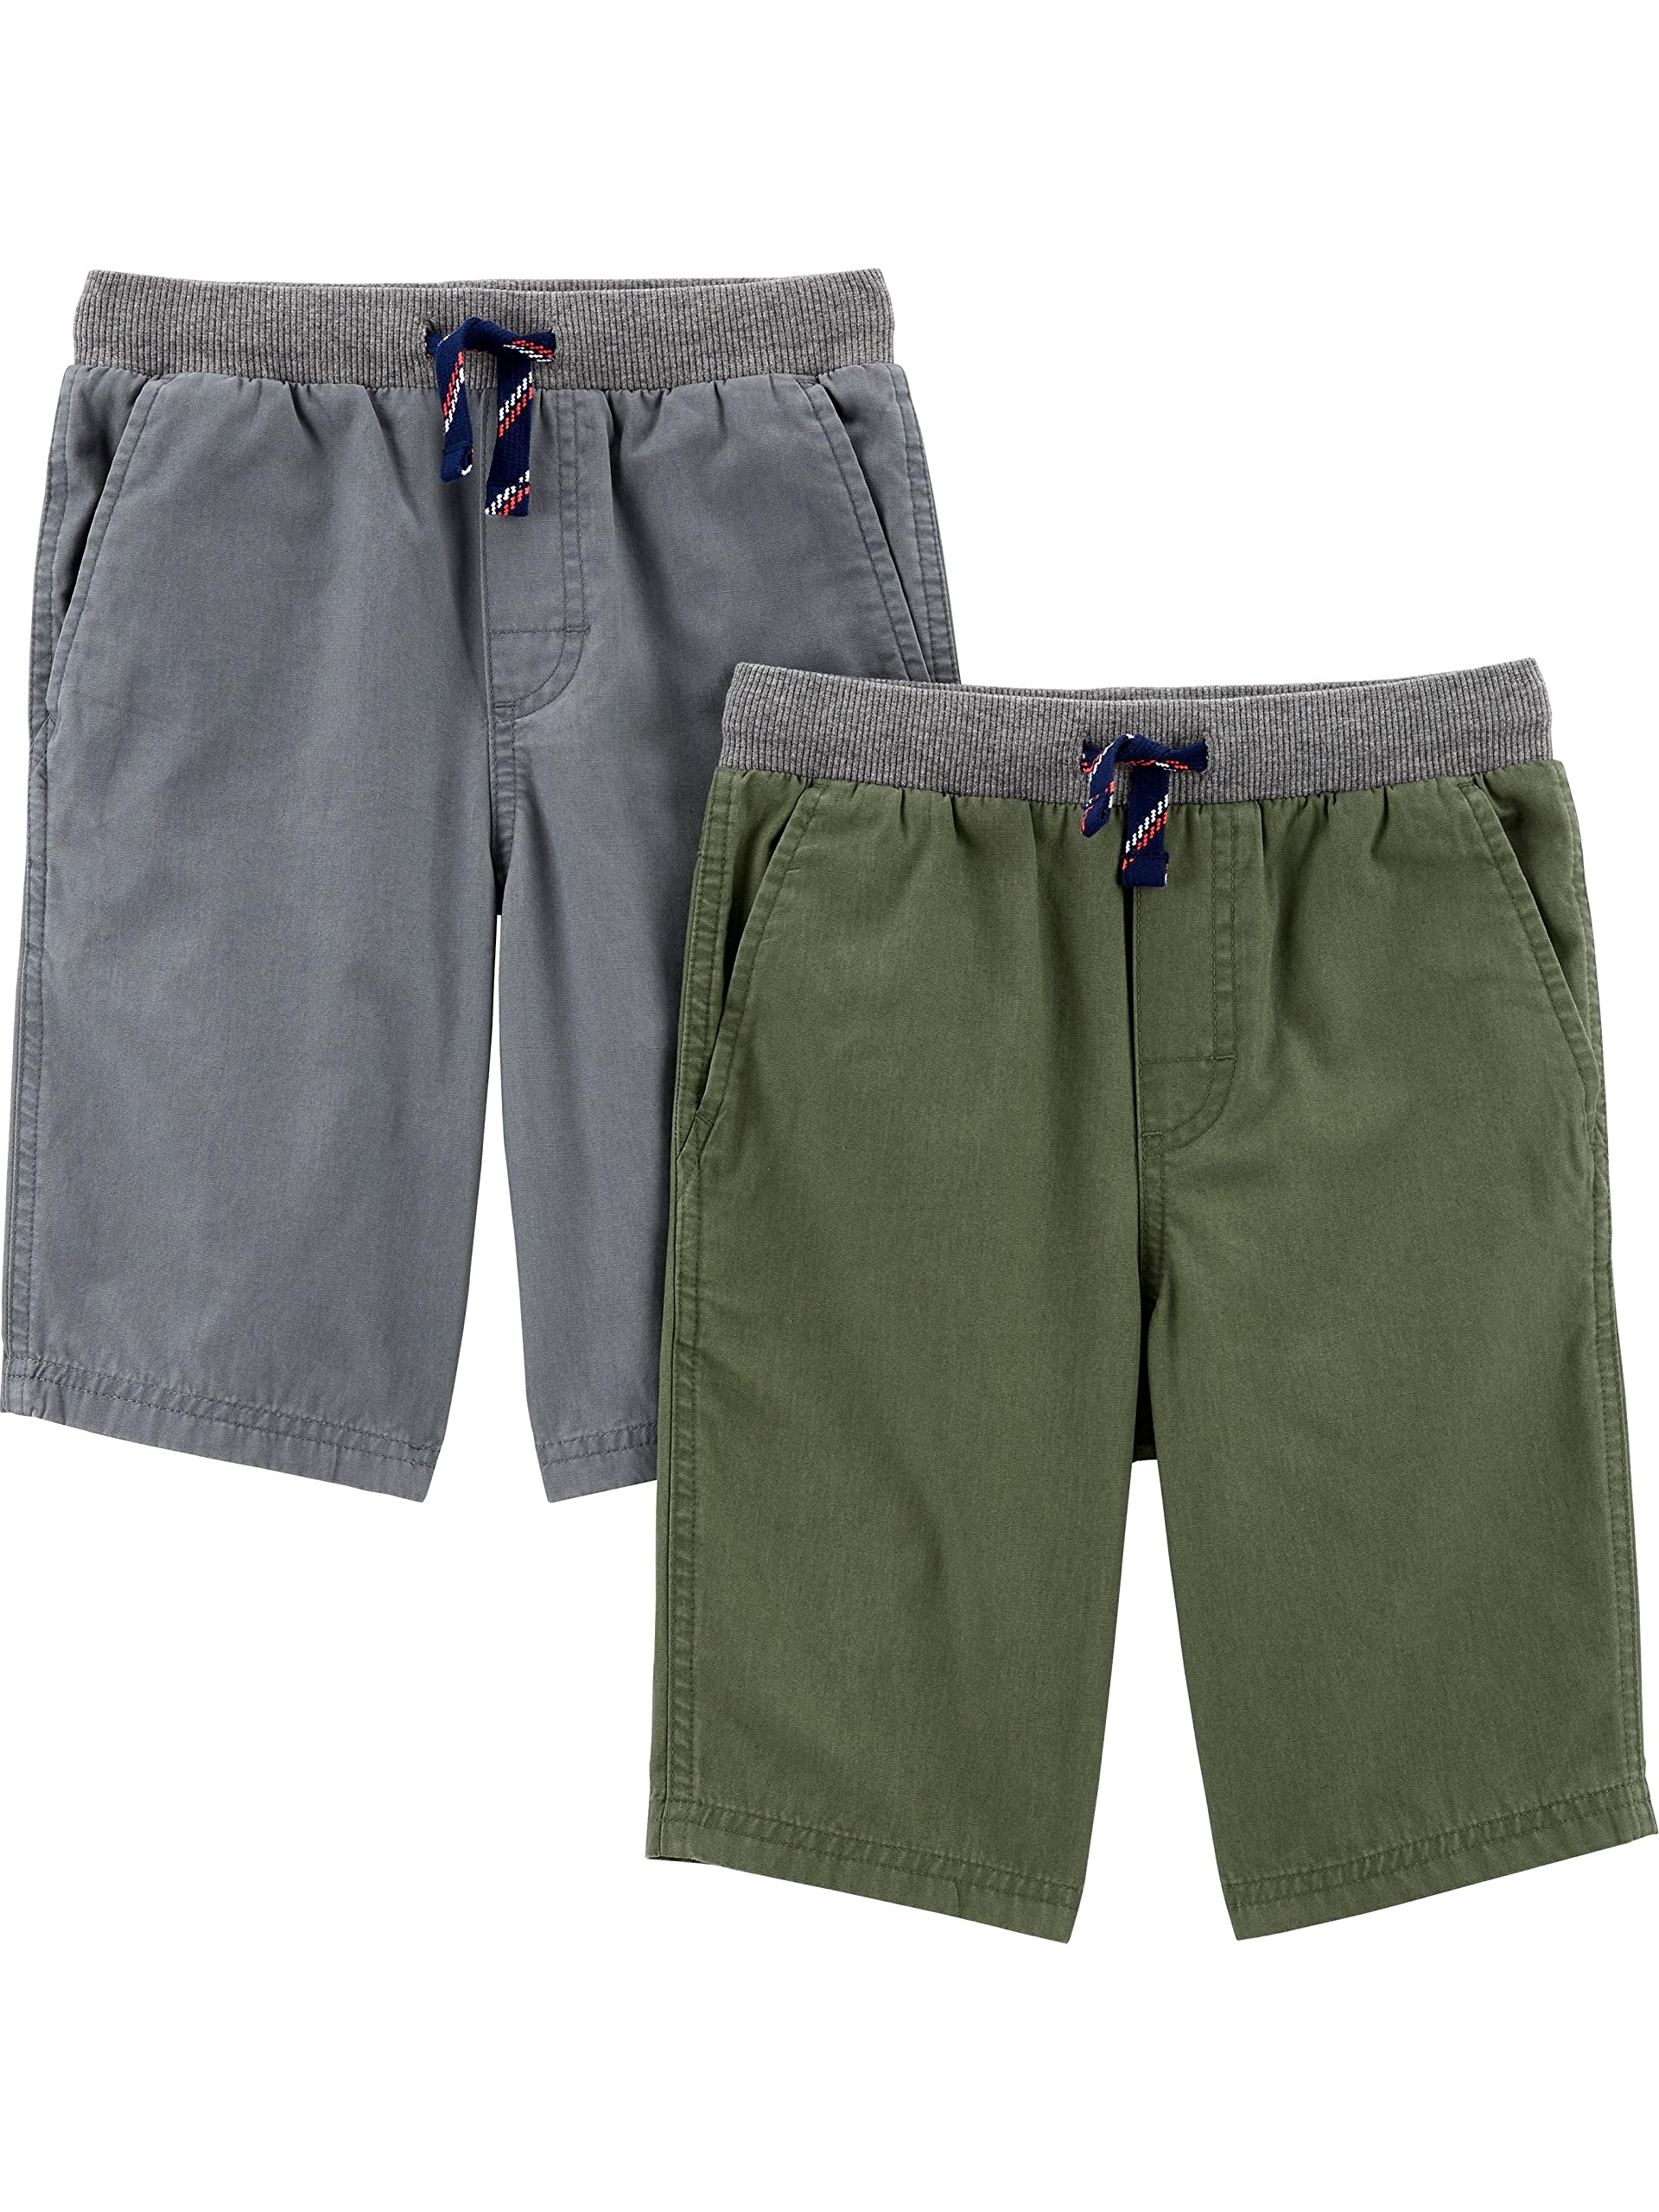 Simple Joys by Carter's Boys' Shorts, Pack of 2